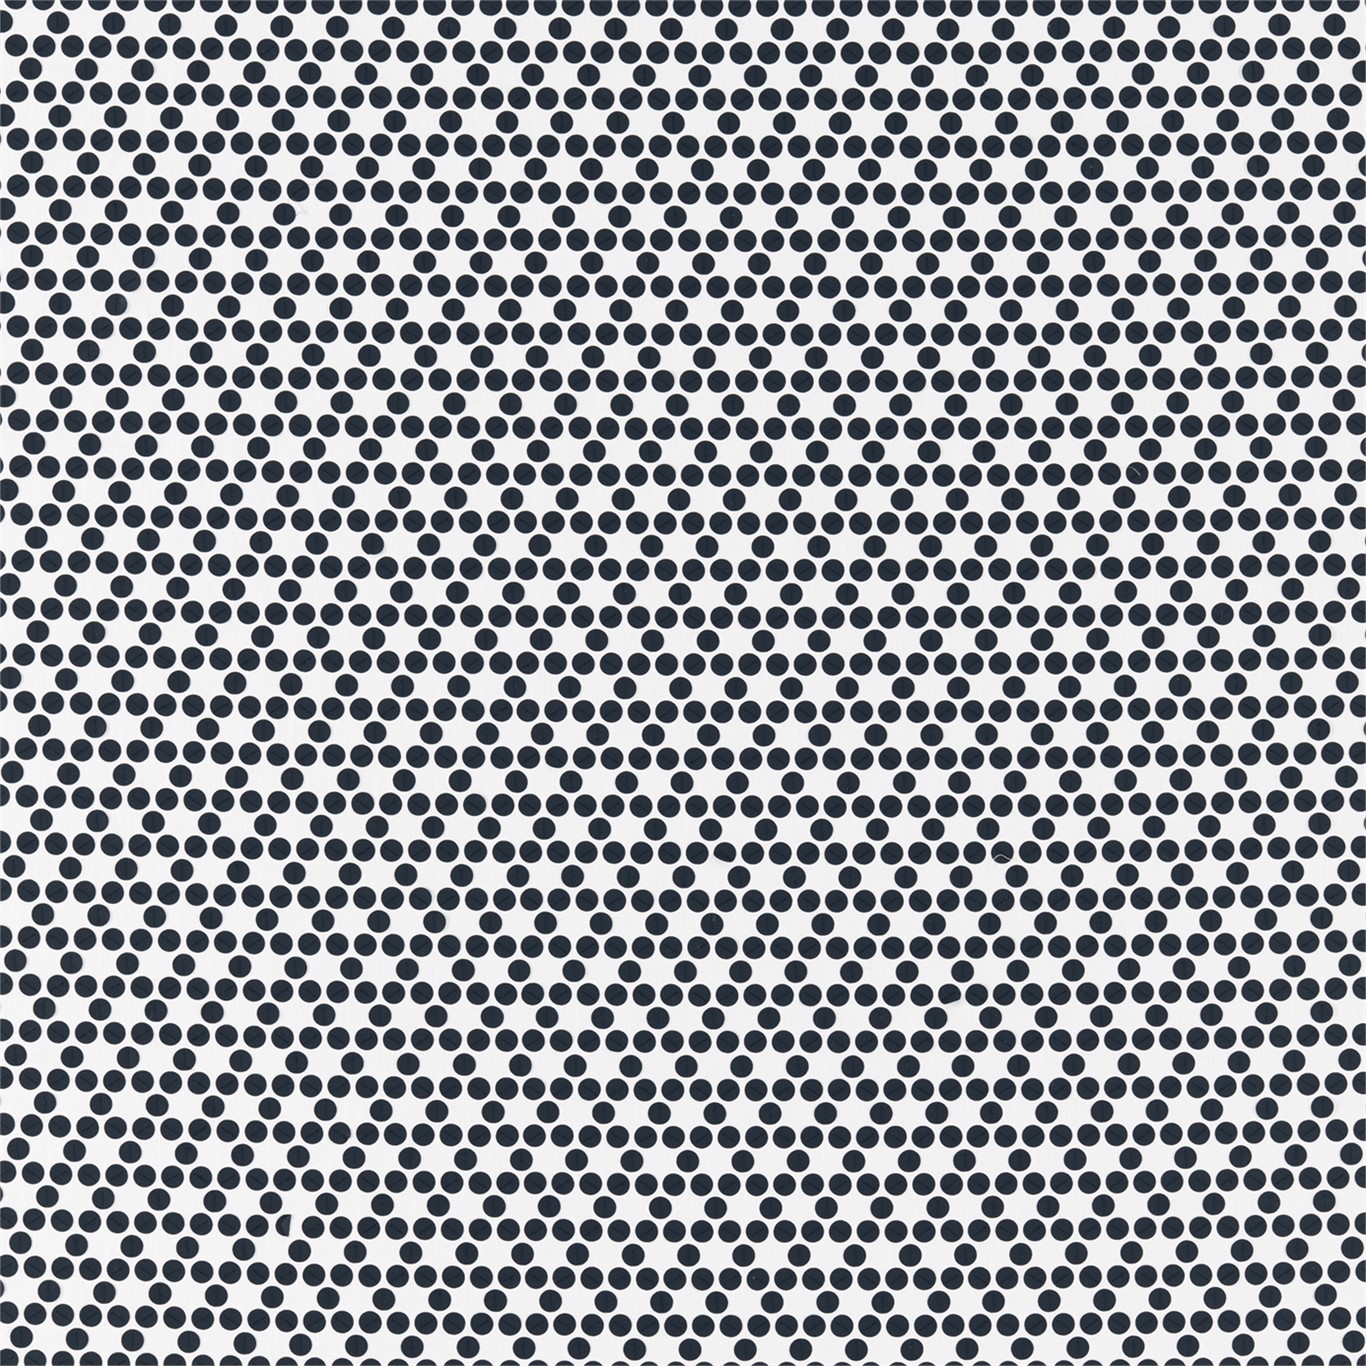 Lunette Domino Fabric by HAR